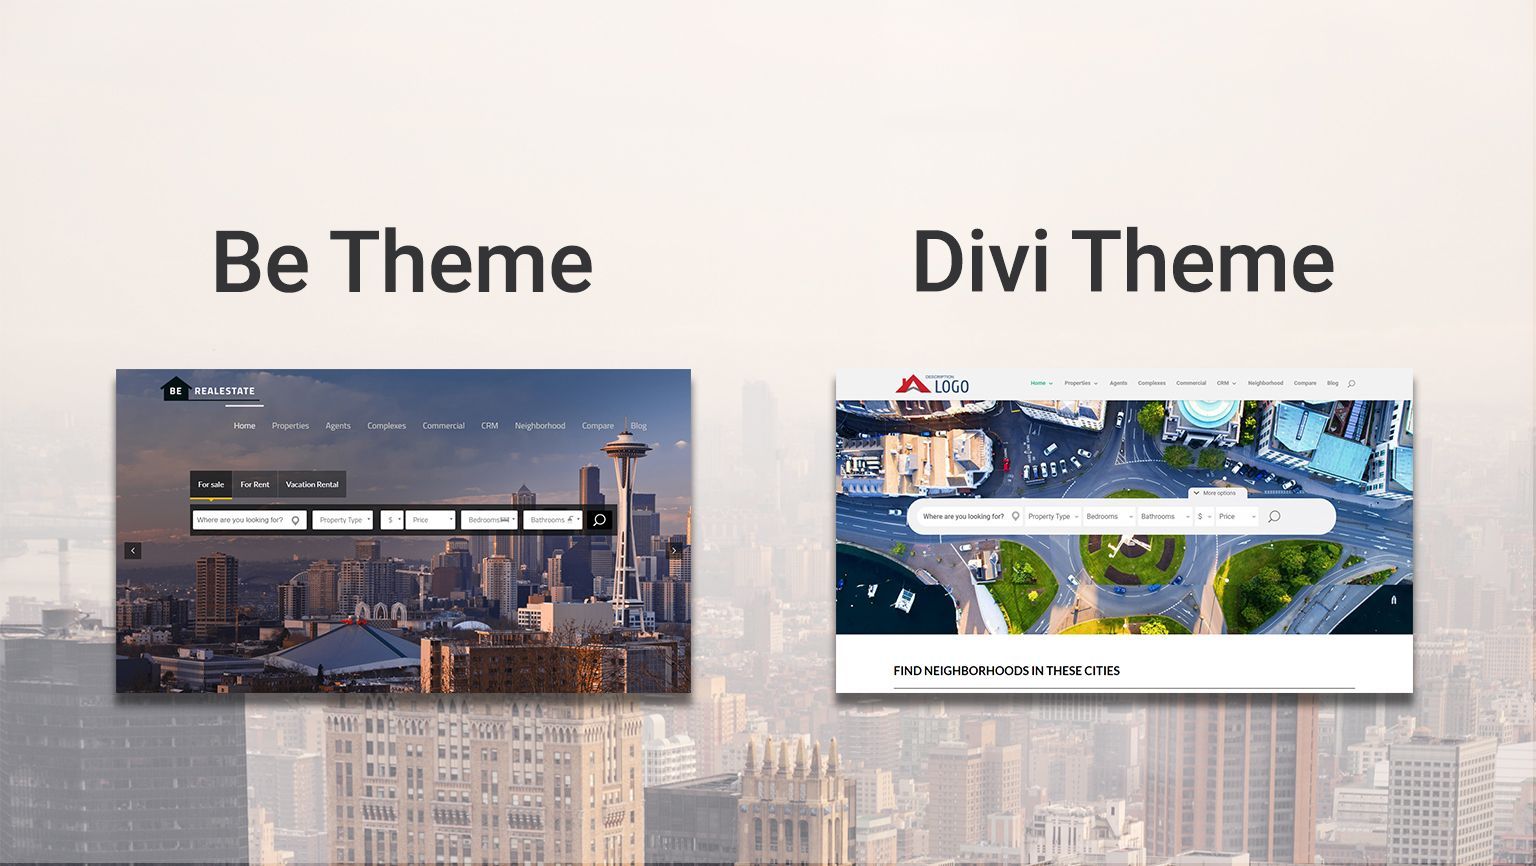 Be Theme and Divi Theme